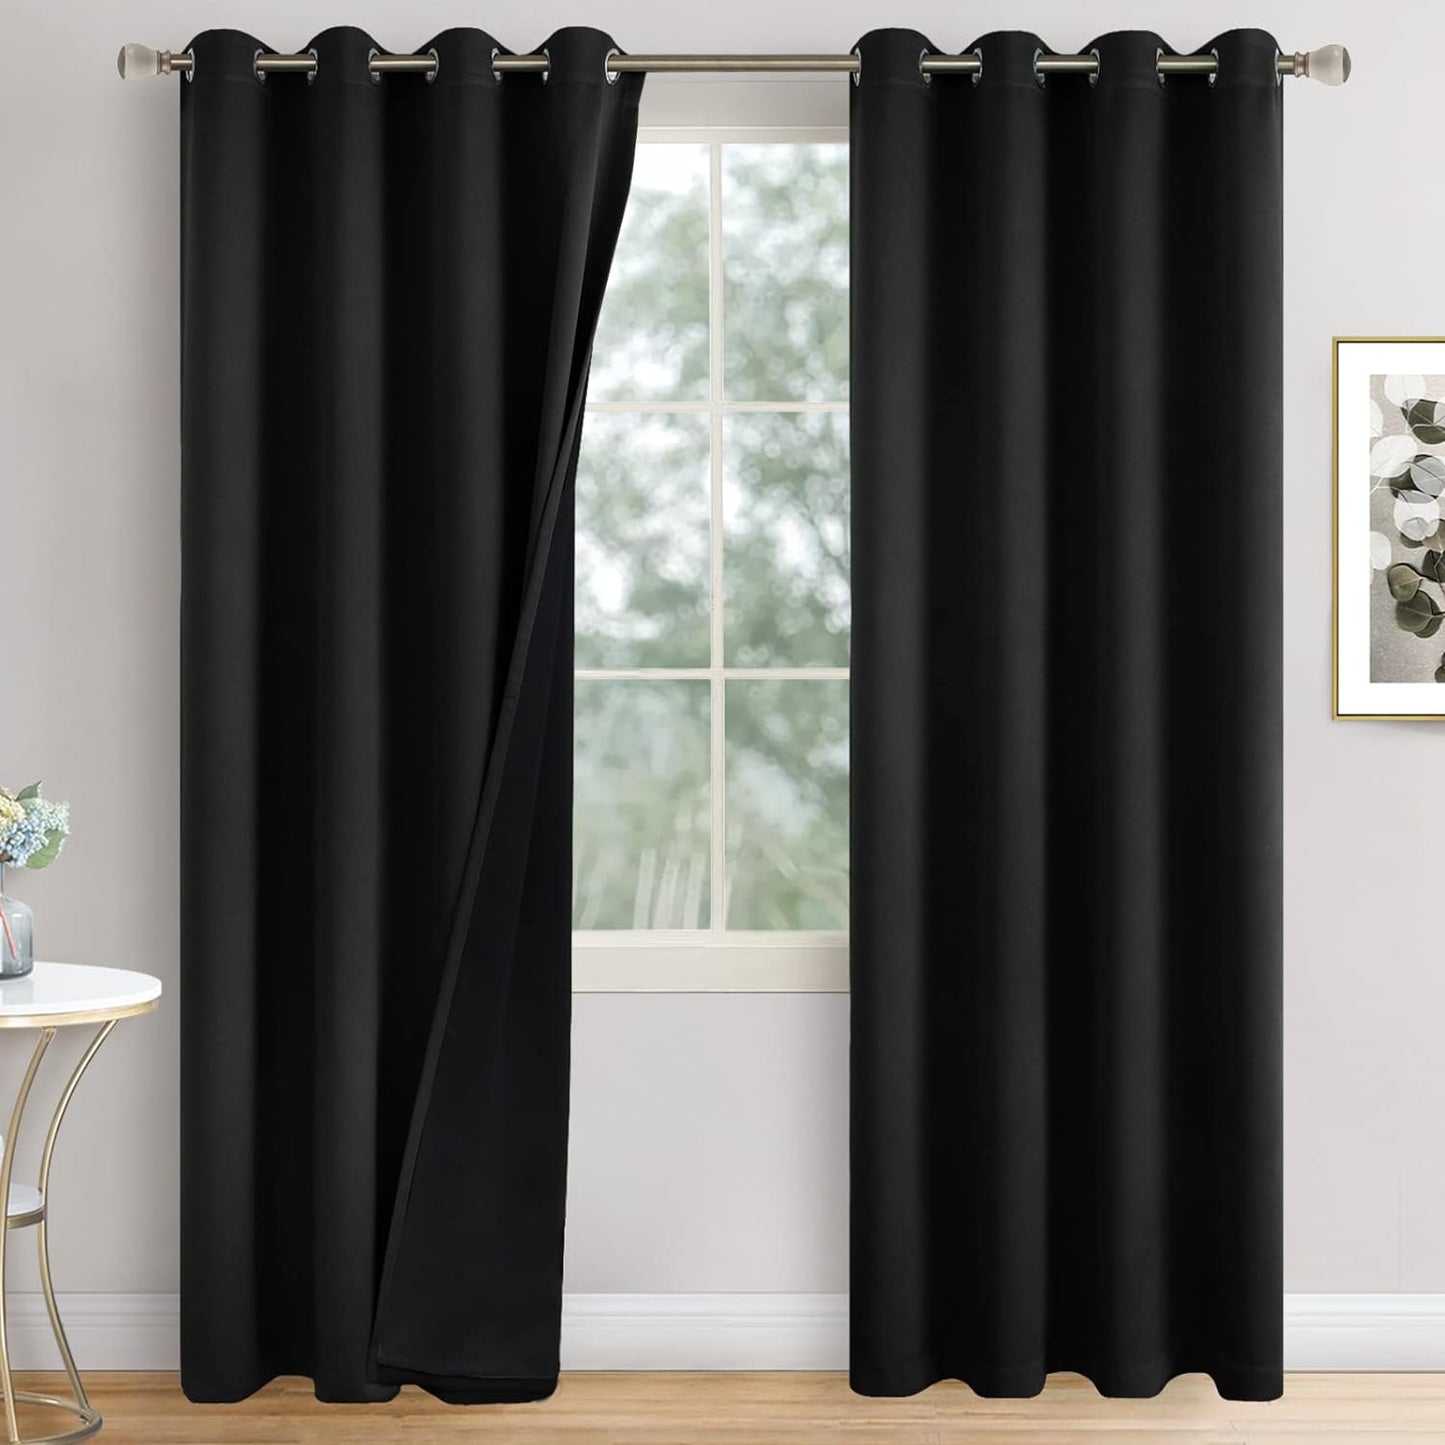 QUEMAS Short Blackout Curtains 54 Inch Length 2 Panels, 100% Light Blocking Thermal Insulated Soundproof Grommet Small Window Curtains for Bedroom Basement with Black Liner, Each 42 Inch Wide, White  QUEMAS Black + Black Lining W52 X L95 